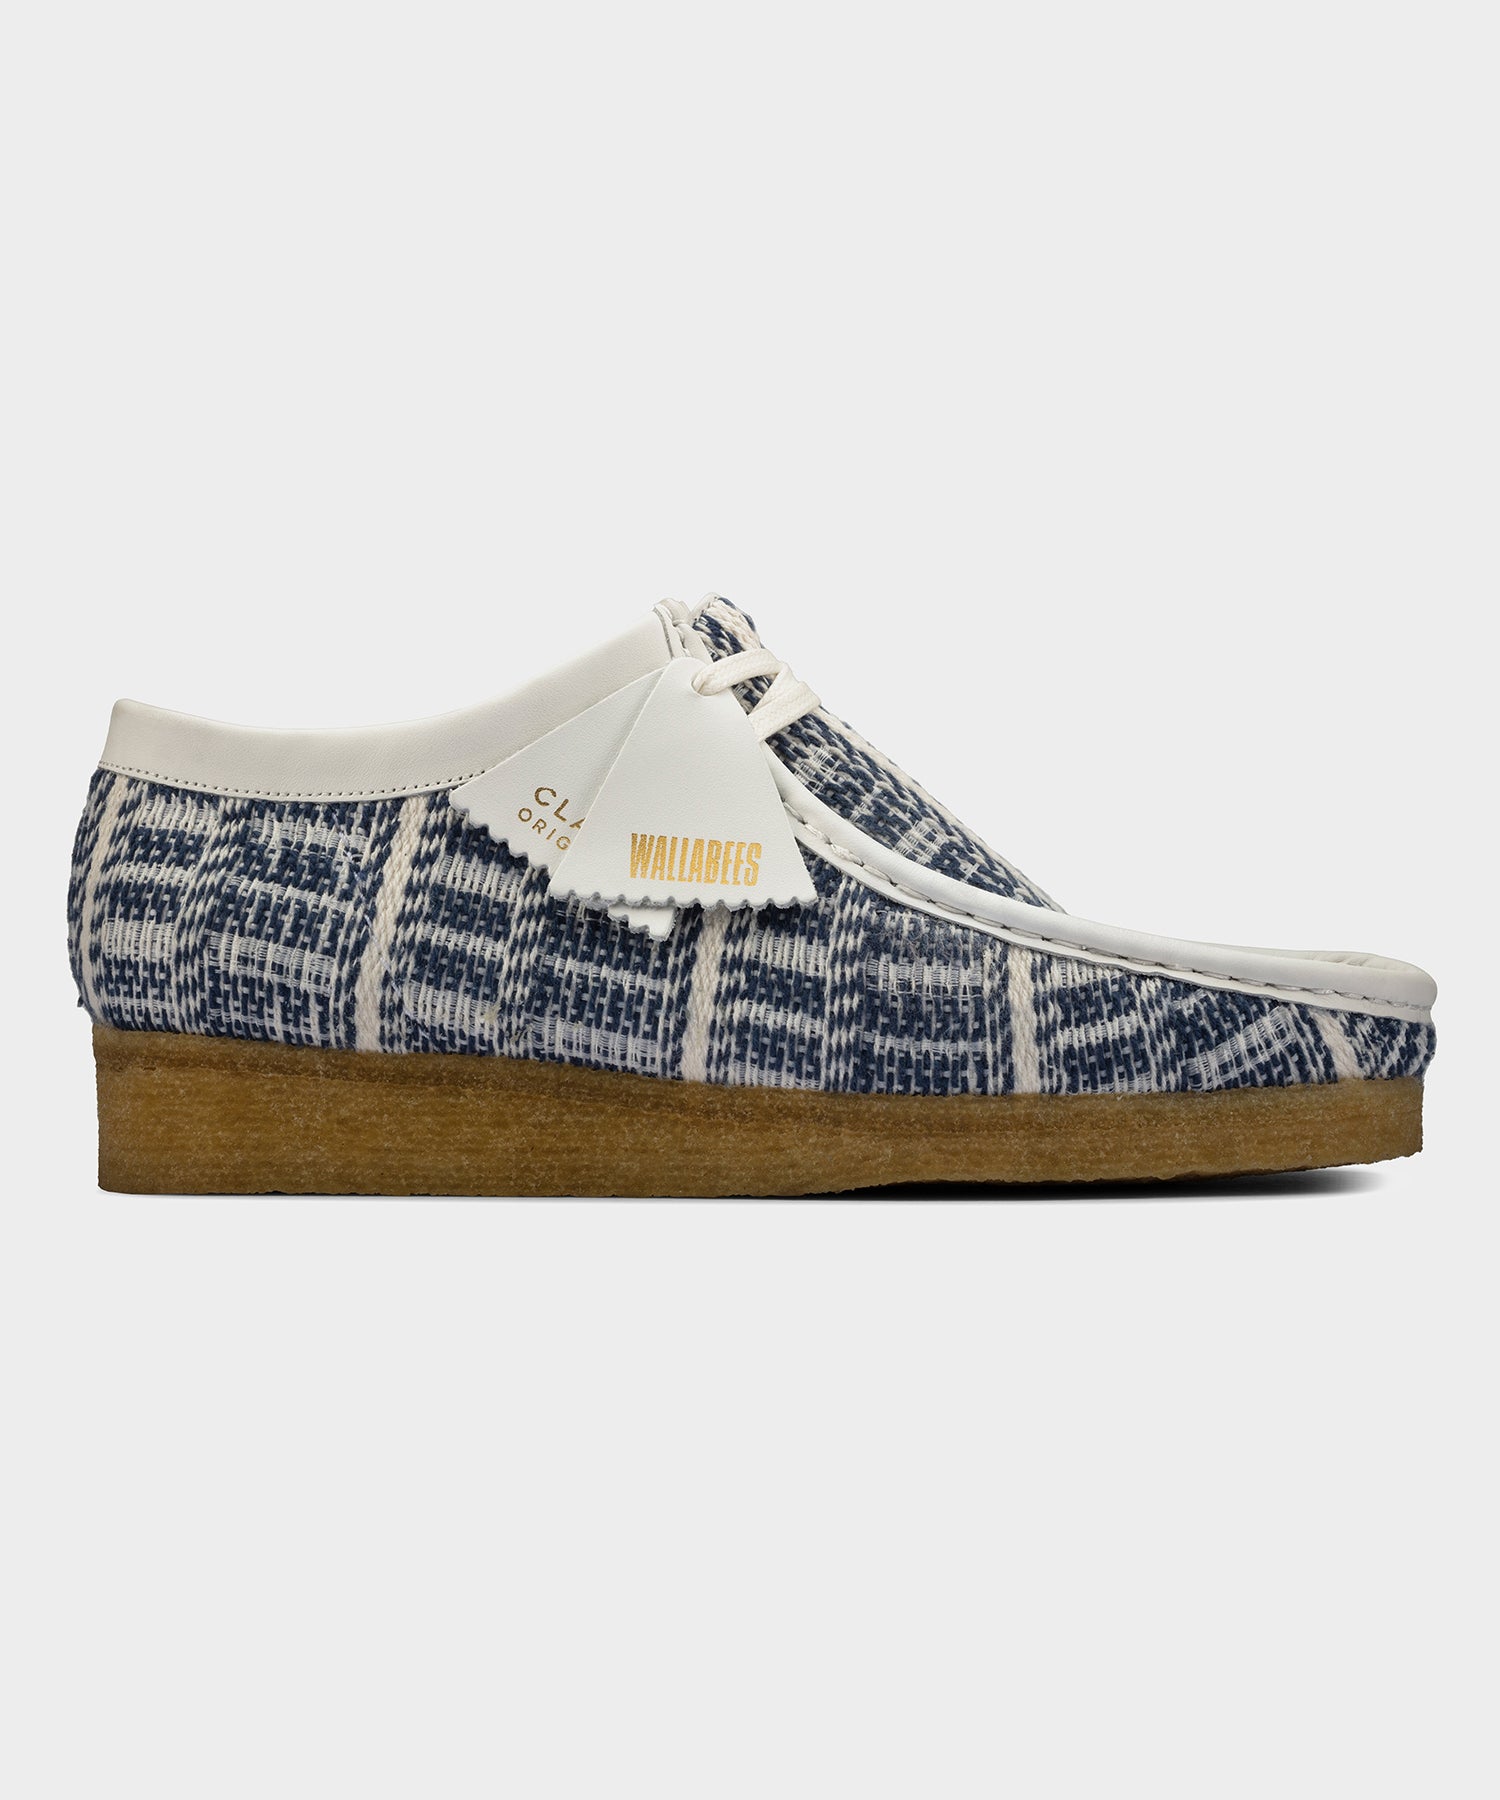 pause dominere Martin Luther King Junior Clarks Wallabee in Woven Indigo Multi - Todd Snyder